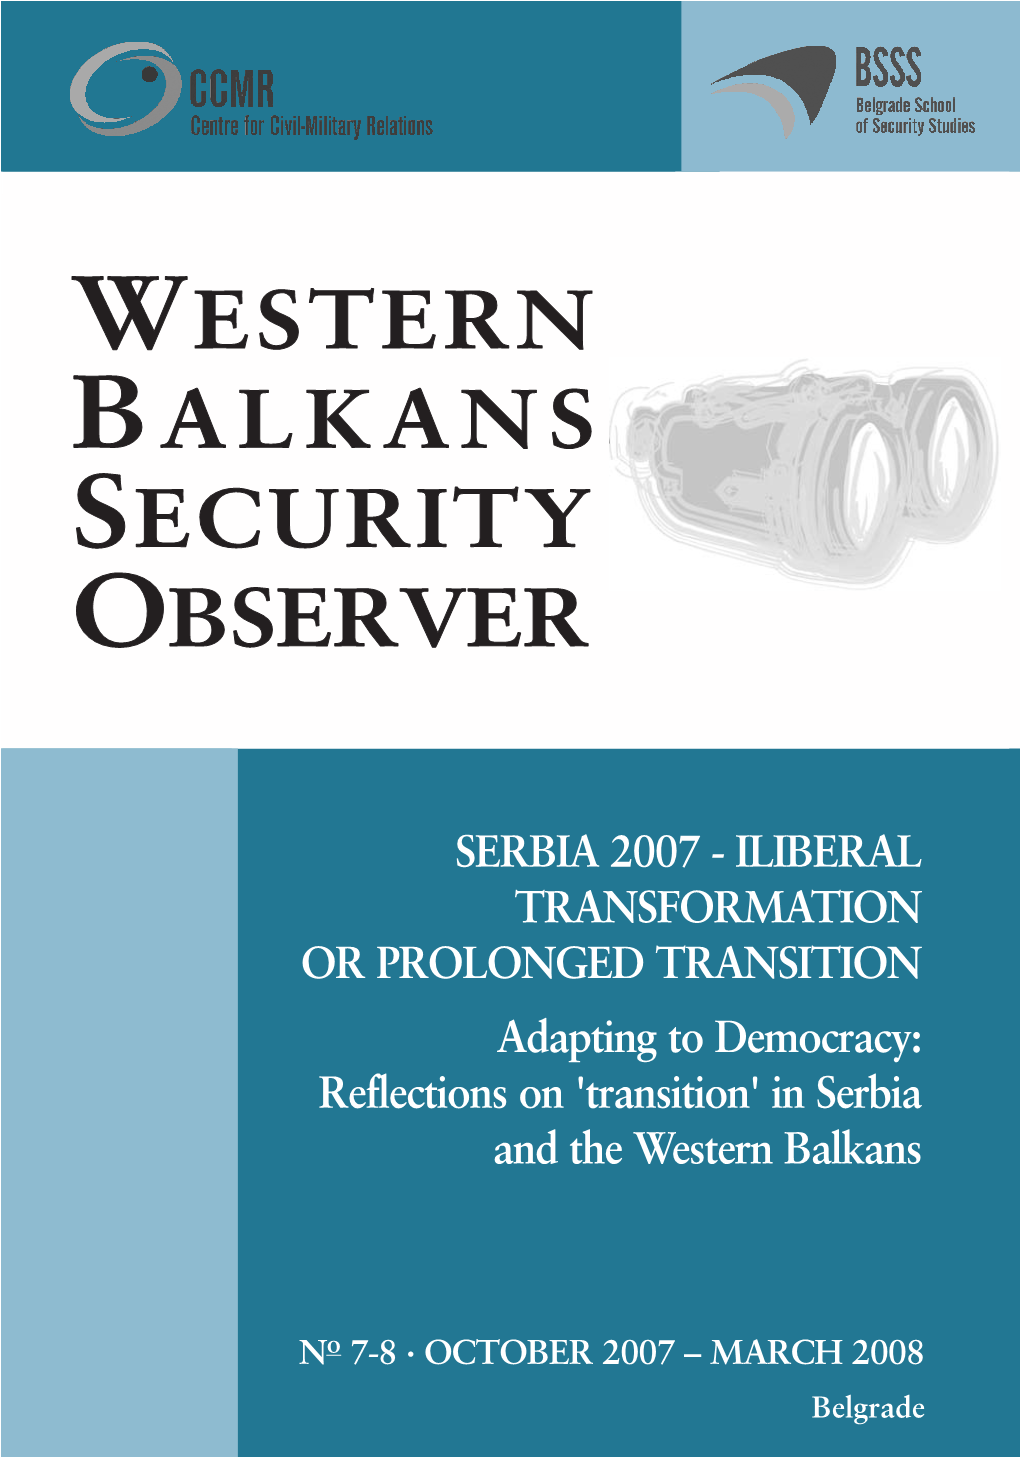 SERBIA 2007 - ILIBERAL TRANSFORMATION OR PROLONGED TRANSITION Adapting to Democracy: Reflections on 'Transition' in Serbia and the Western Balkans